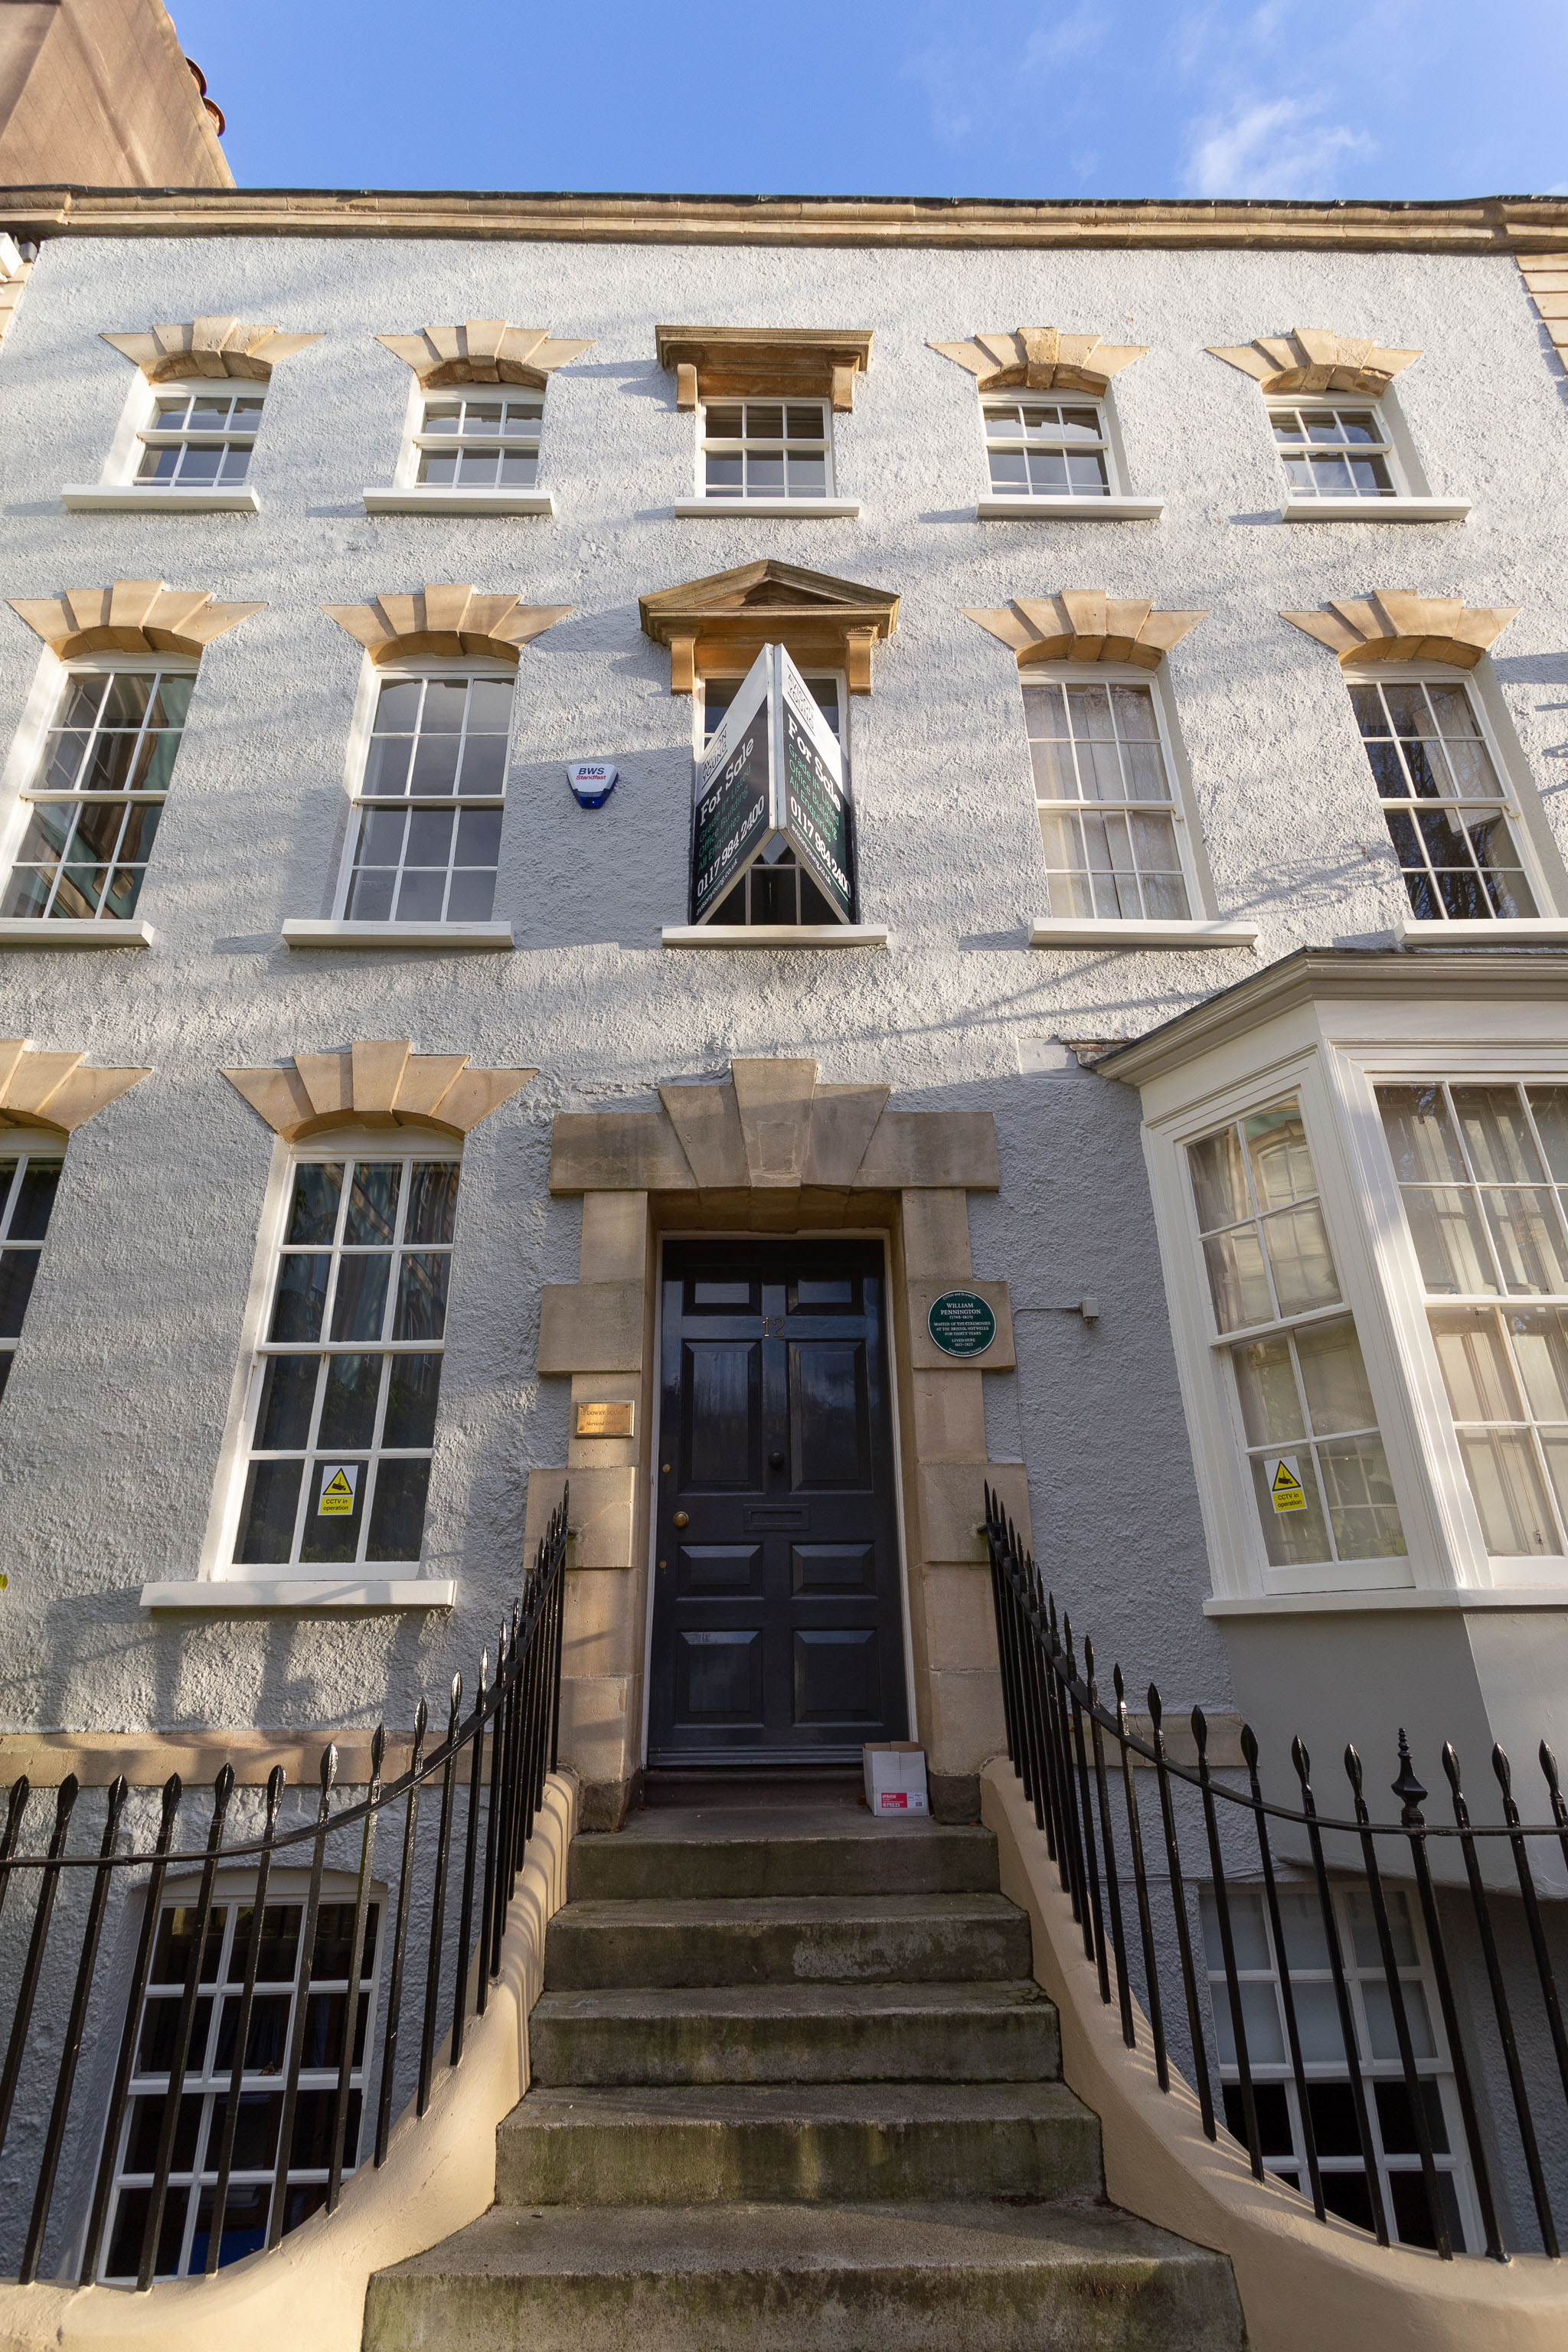 Offices for Sale, 12 Dowry Square
It's currently set up as a set of separate serviced offices. If you're interested in buying the freehold, they're looking for offers in excess of £...